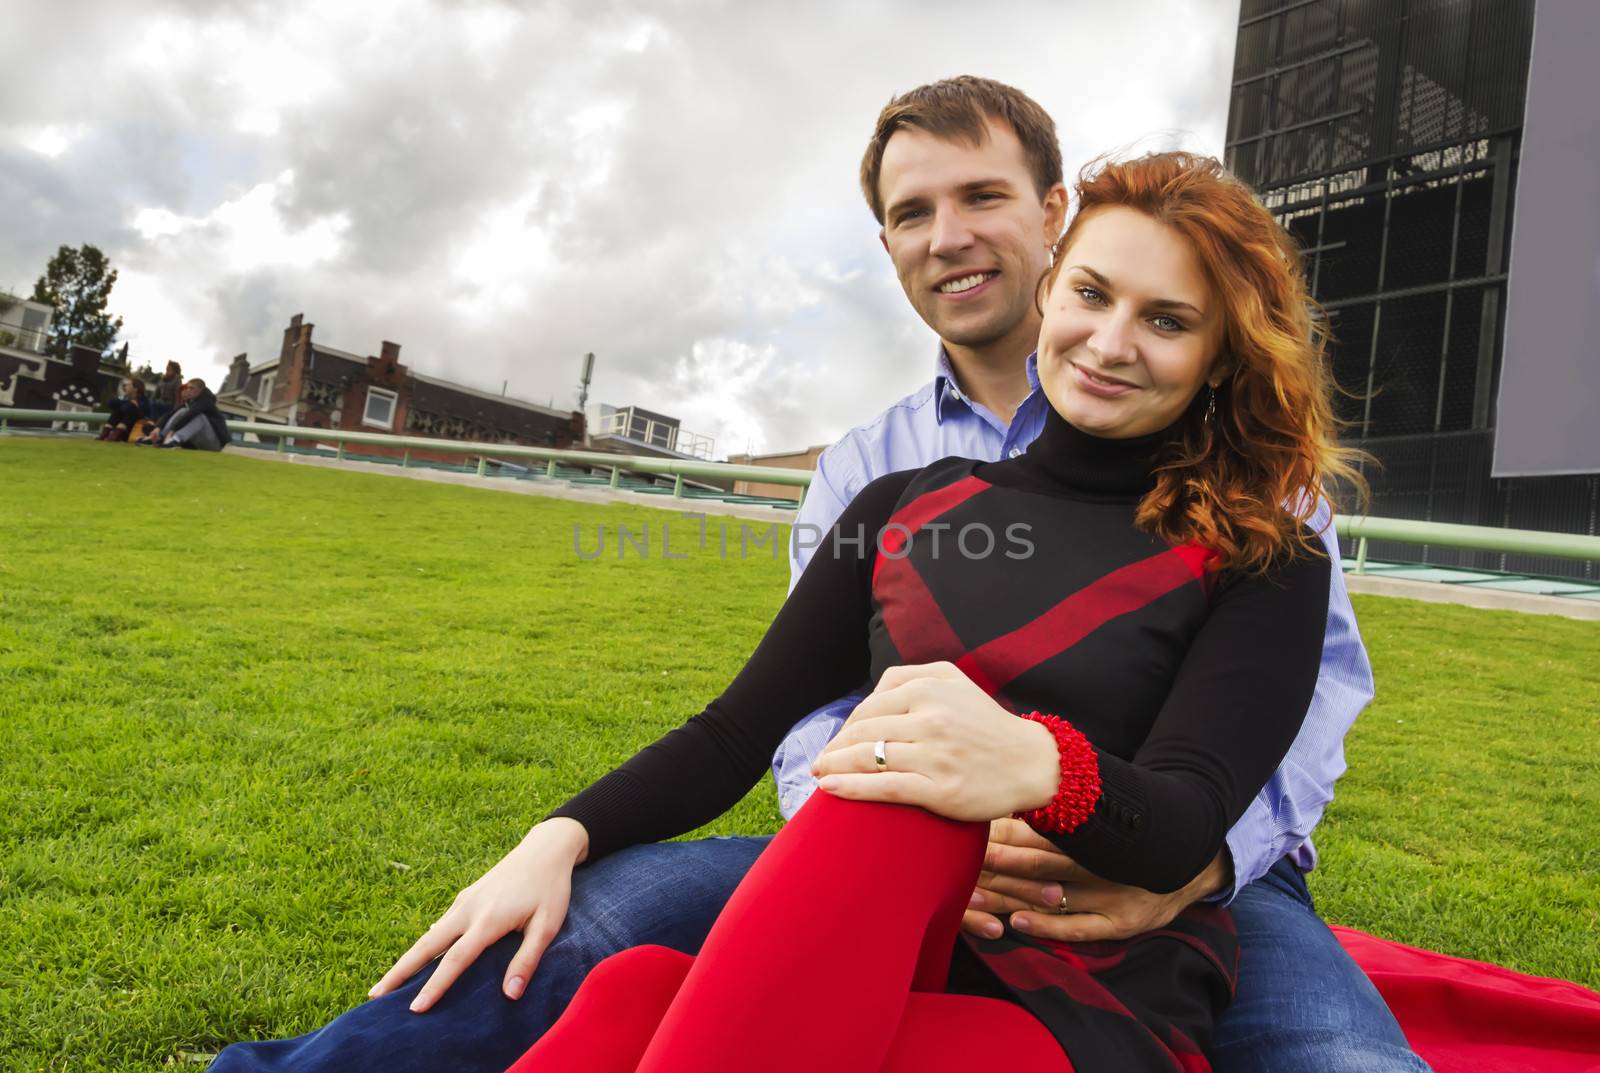 Outdoor happy couple in love posing in Museum Plein, autumn Amst by Tetyana